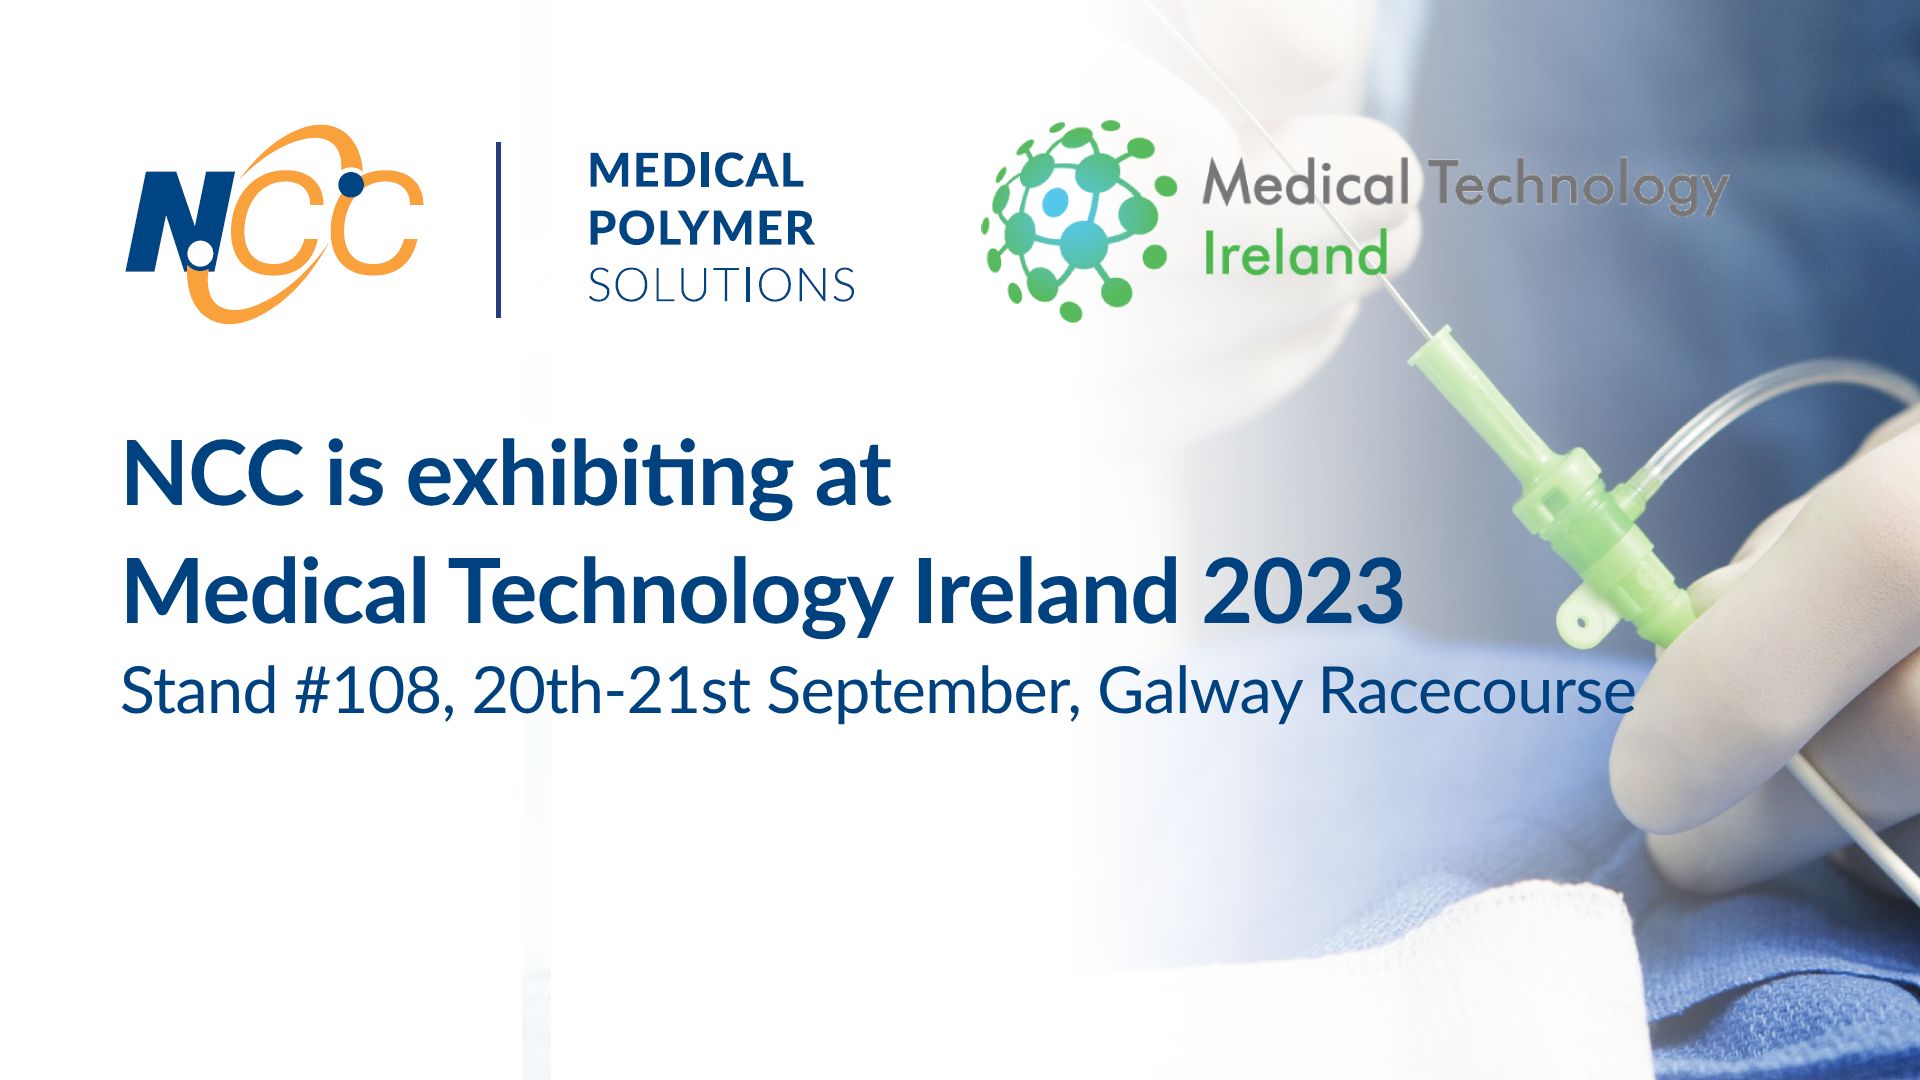 NCC is exhibiting at Medical Technology Ireland 2023